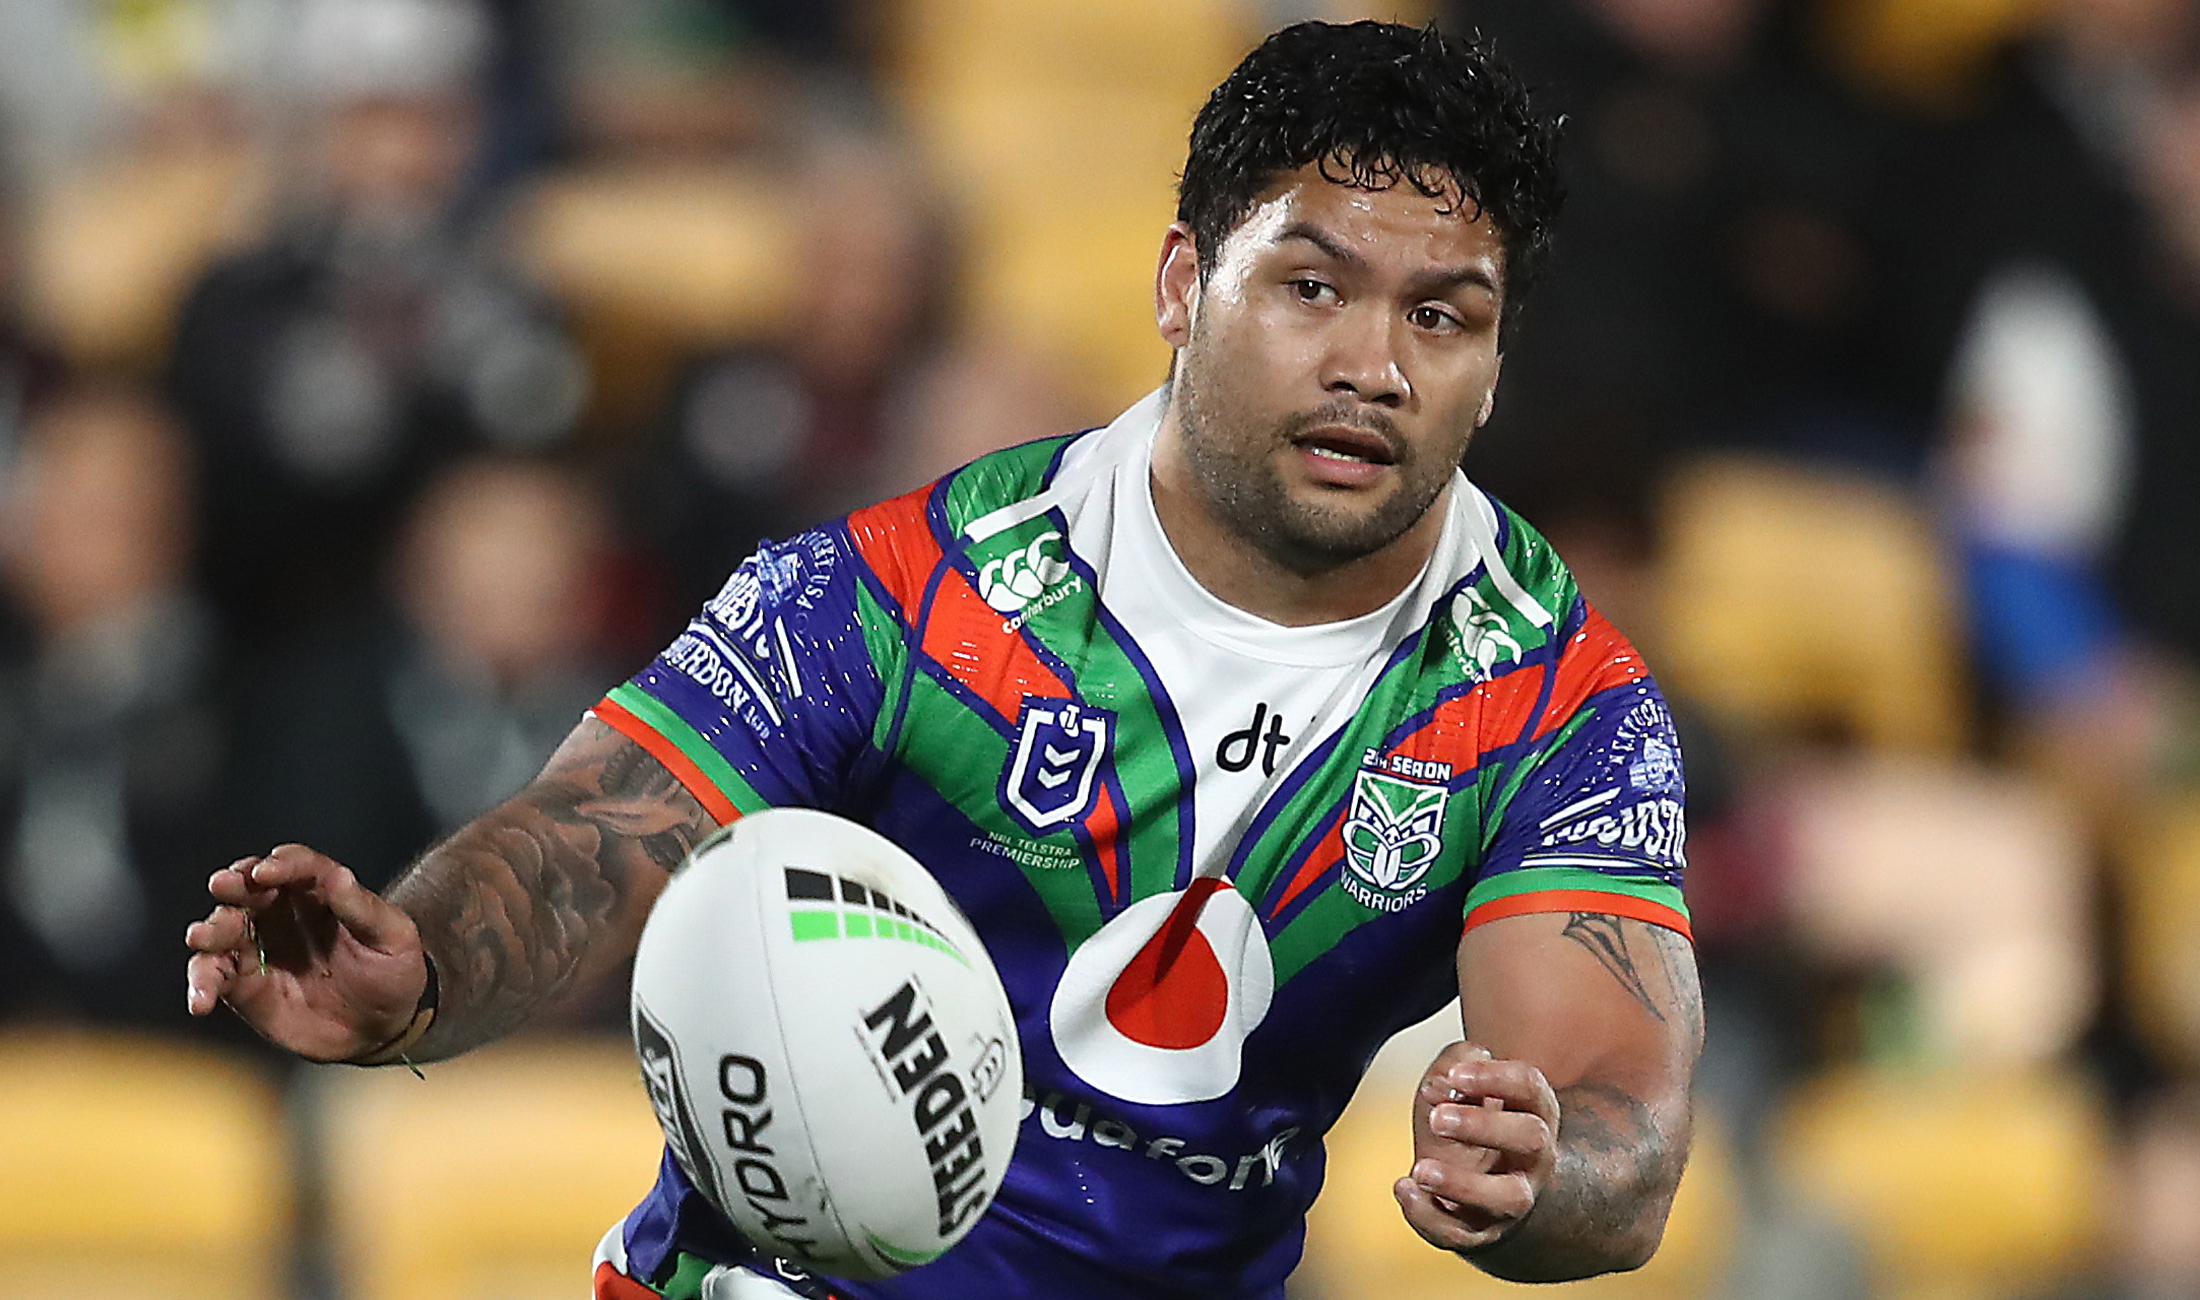 The St George Illawarra Dragons confirmed the signing of NRL veteran Issac Luke for 2020.